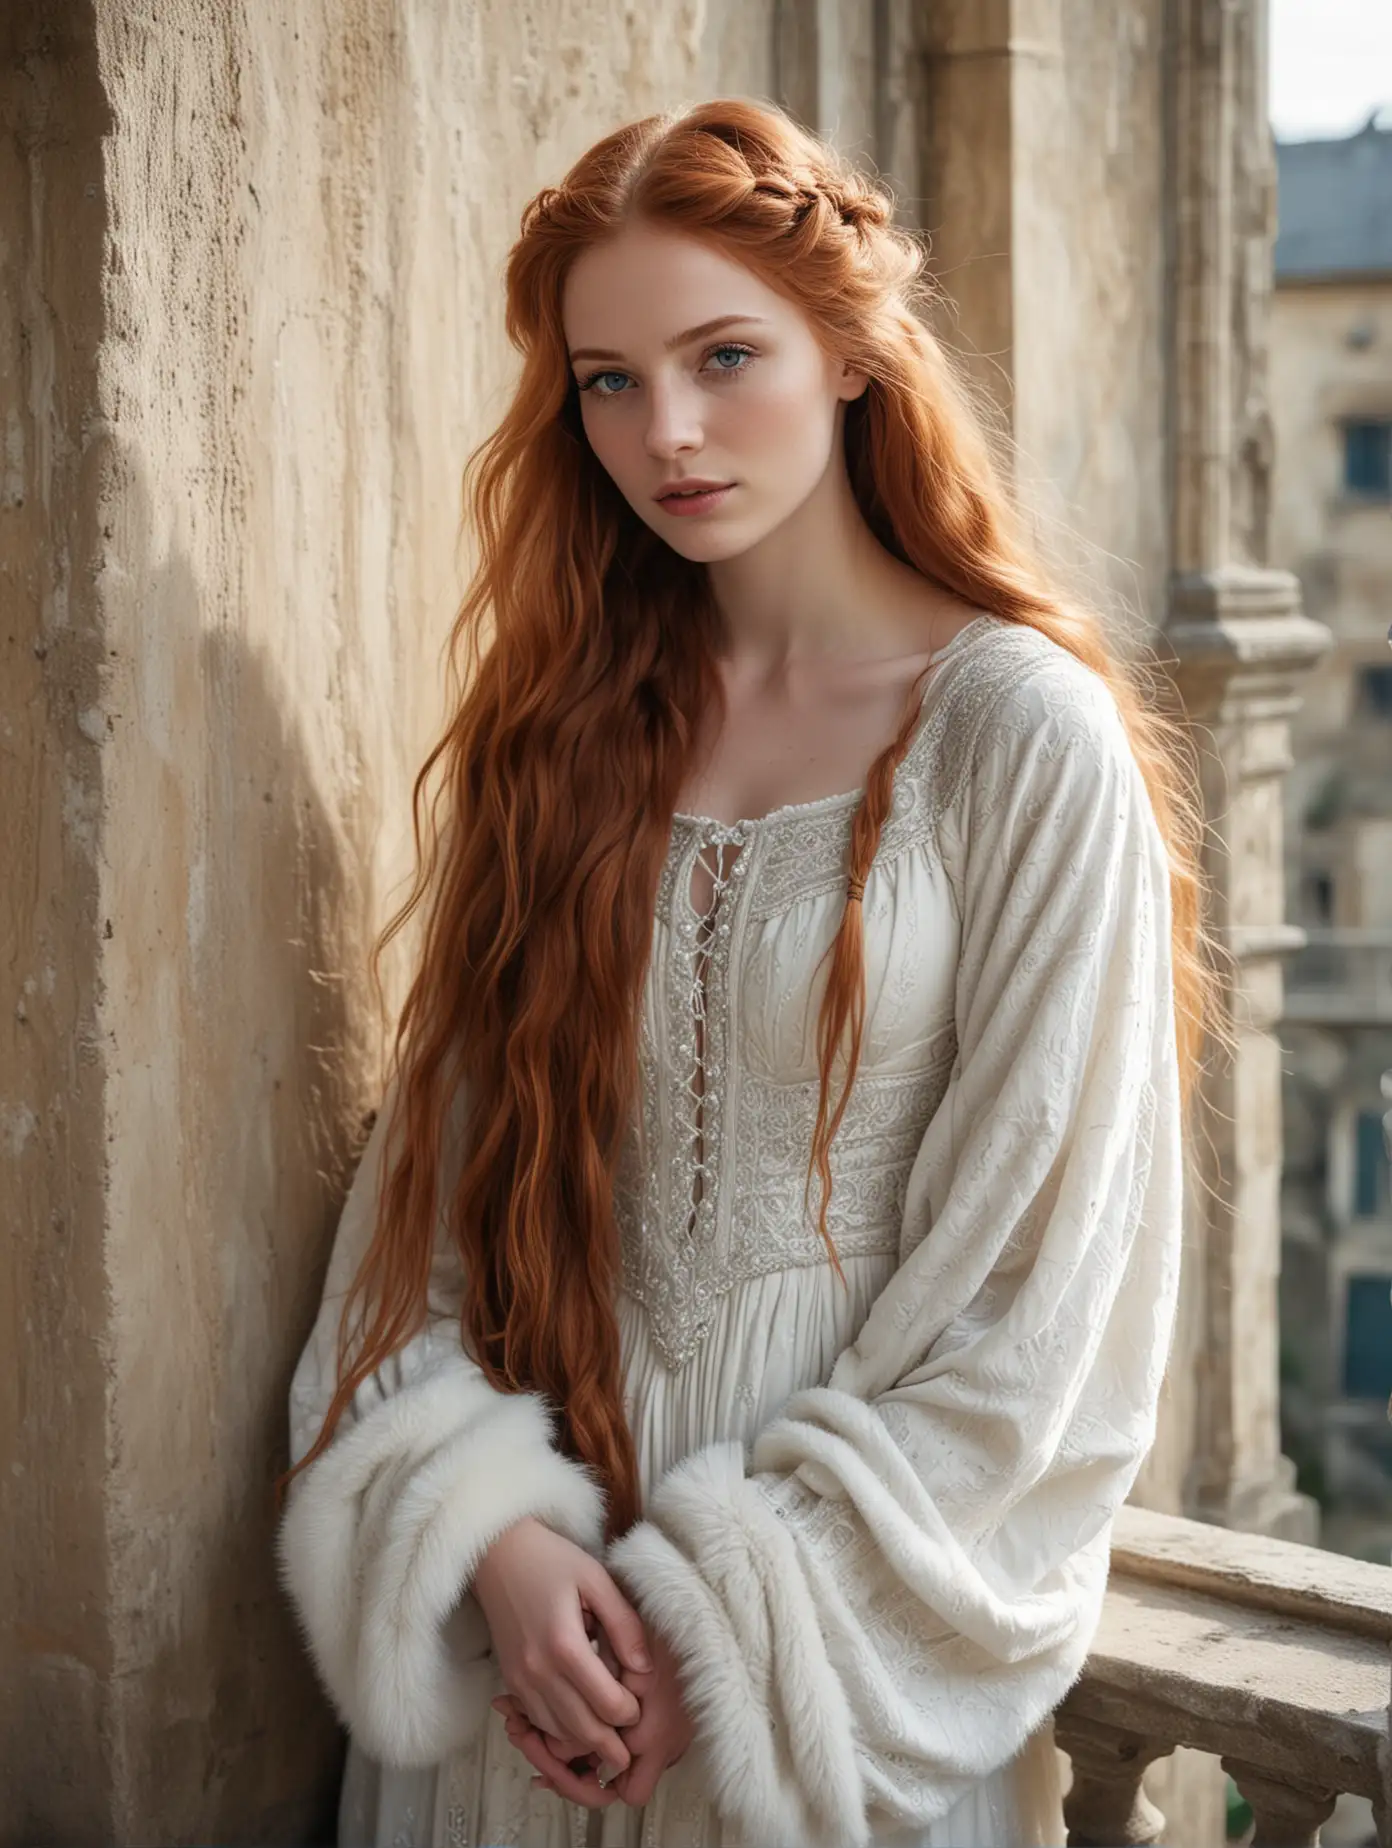 Medieval RedHaired Teenage Girl on Stone Balcony in FurTrimmed Gown